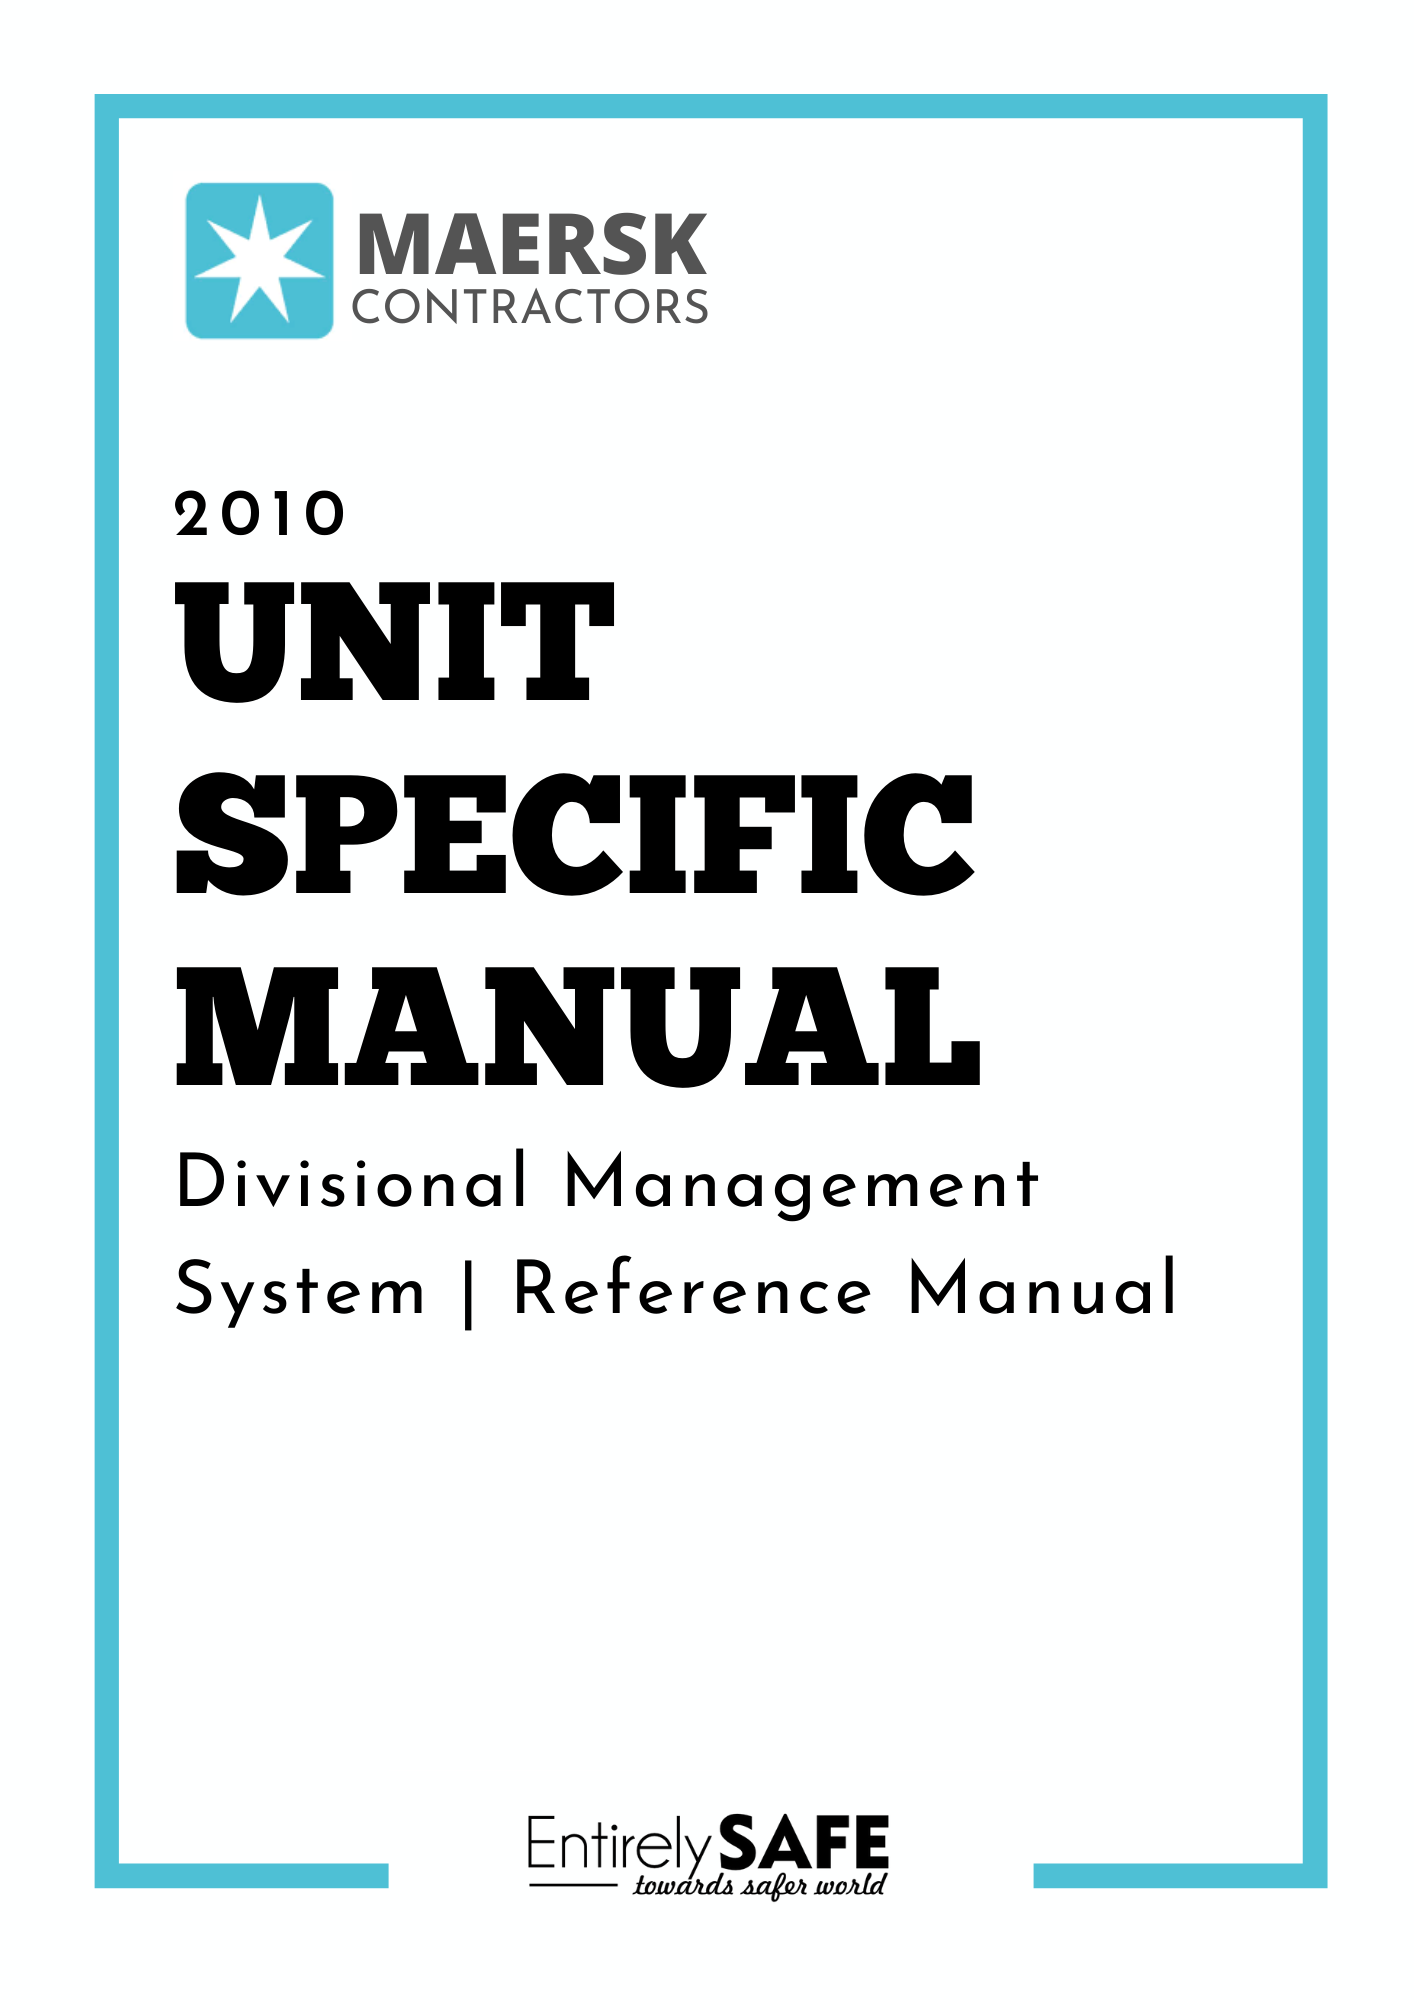 #149-FREE-Download-Unit-Specific-Manual-Maersk-Contractors.png